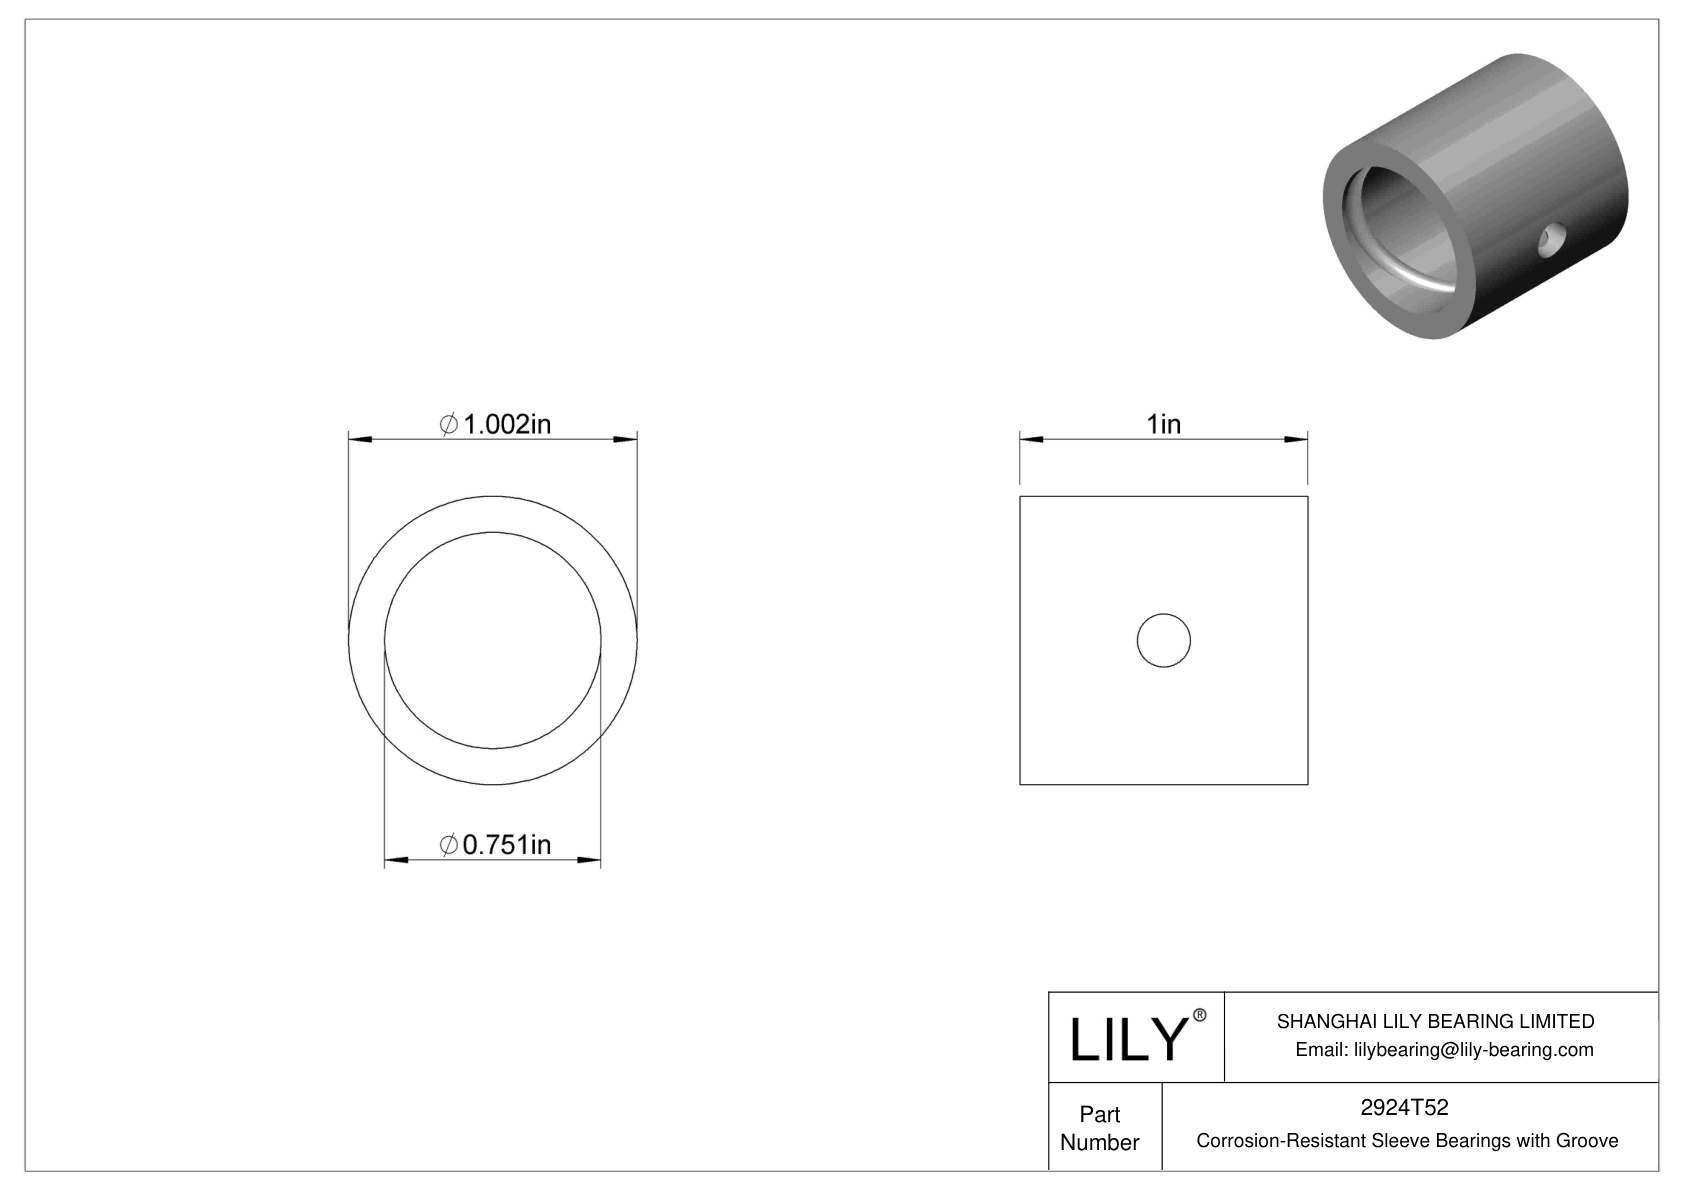 CJCETFC Corrosion-Resistant Sleeve Bearings with Groove cad drawing